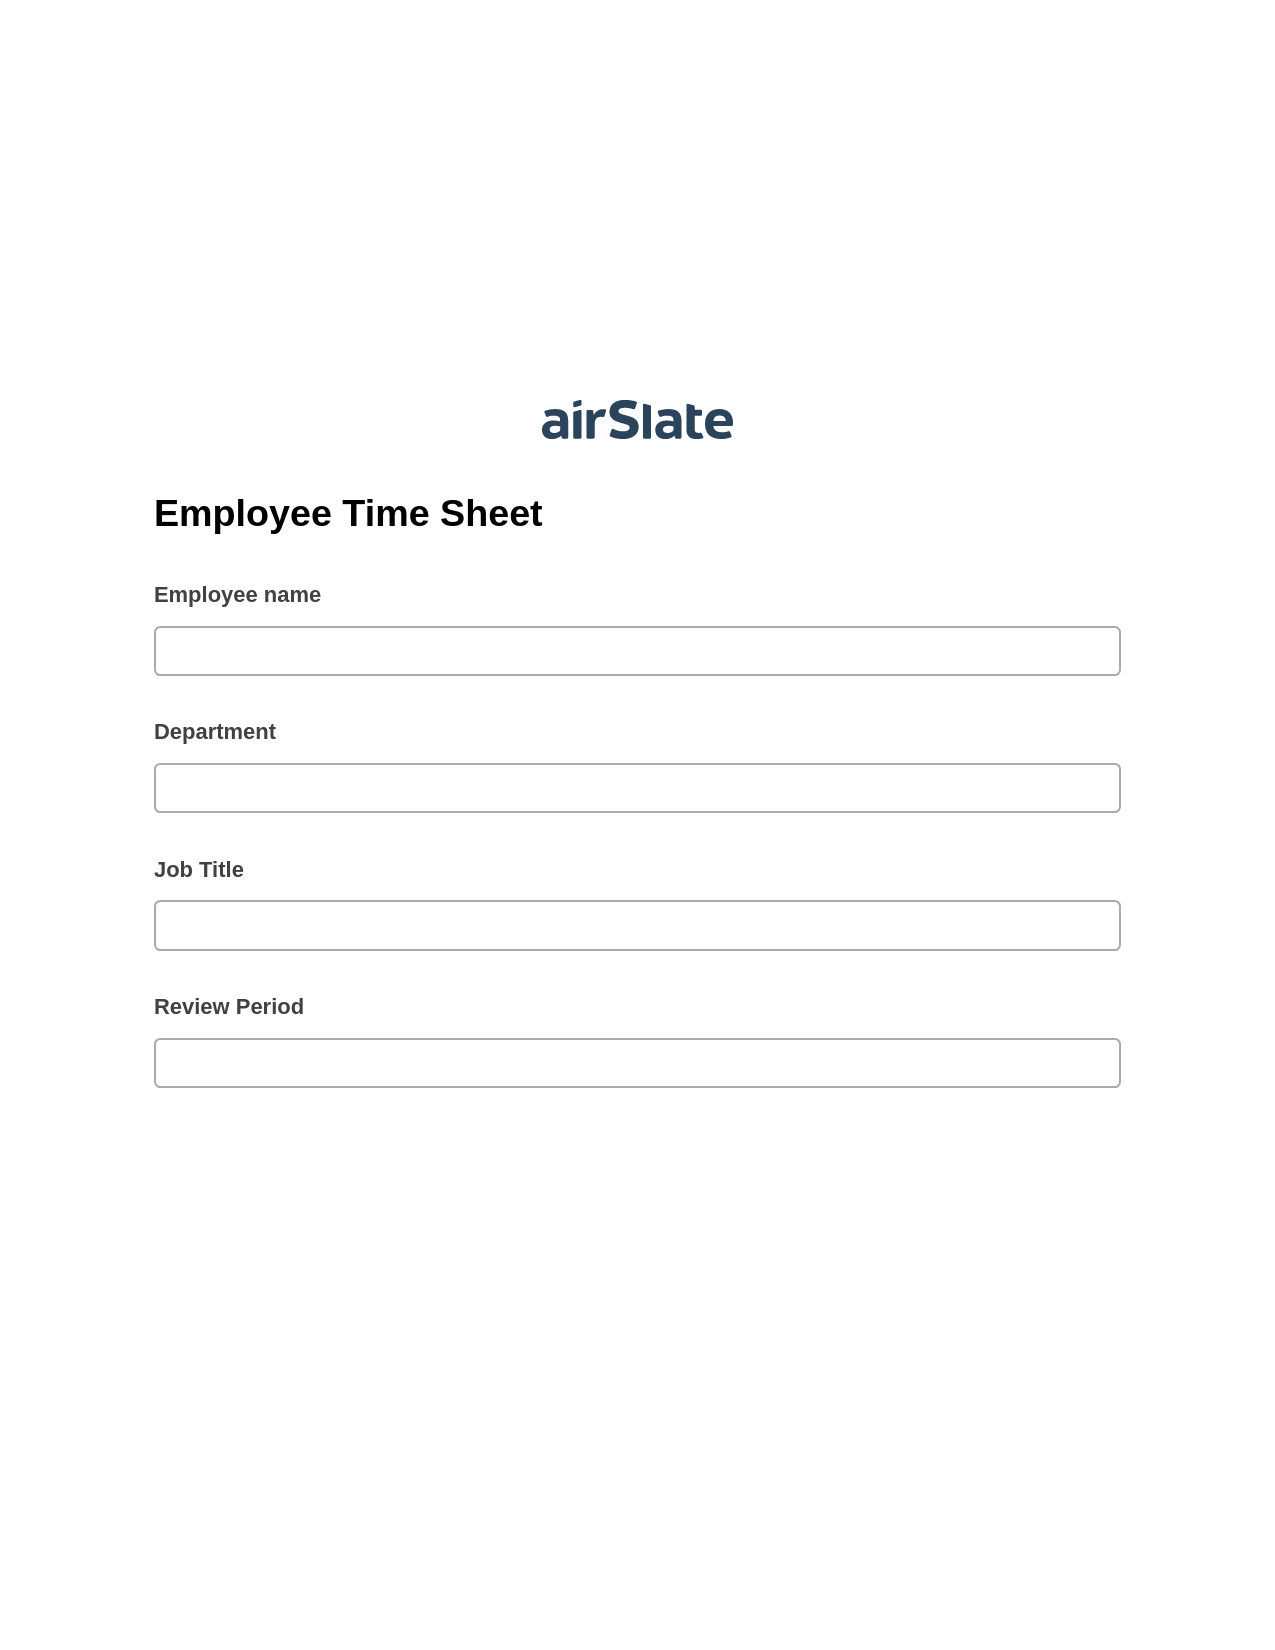 Multirole Employee Time Sheet Pre-fill from Excel Spreadsheet Bot, Create Slate every Google Sheet Update Bot, Archive to Box Bot